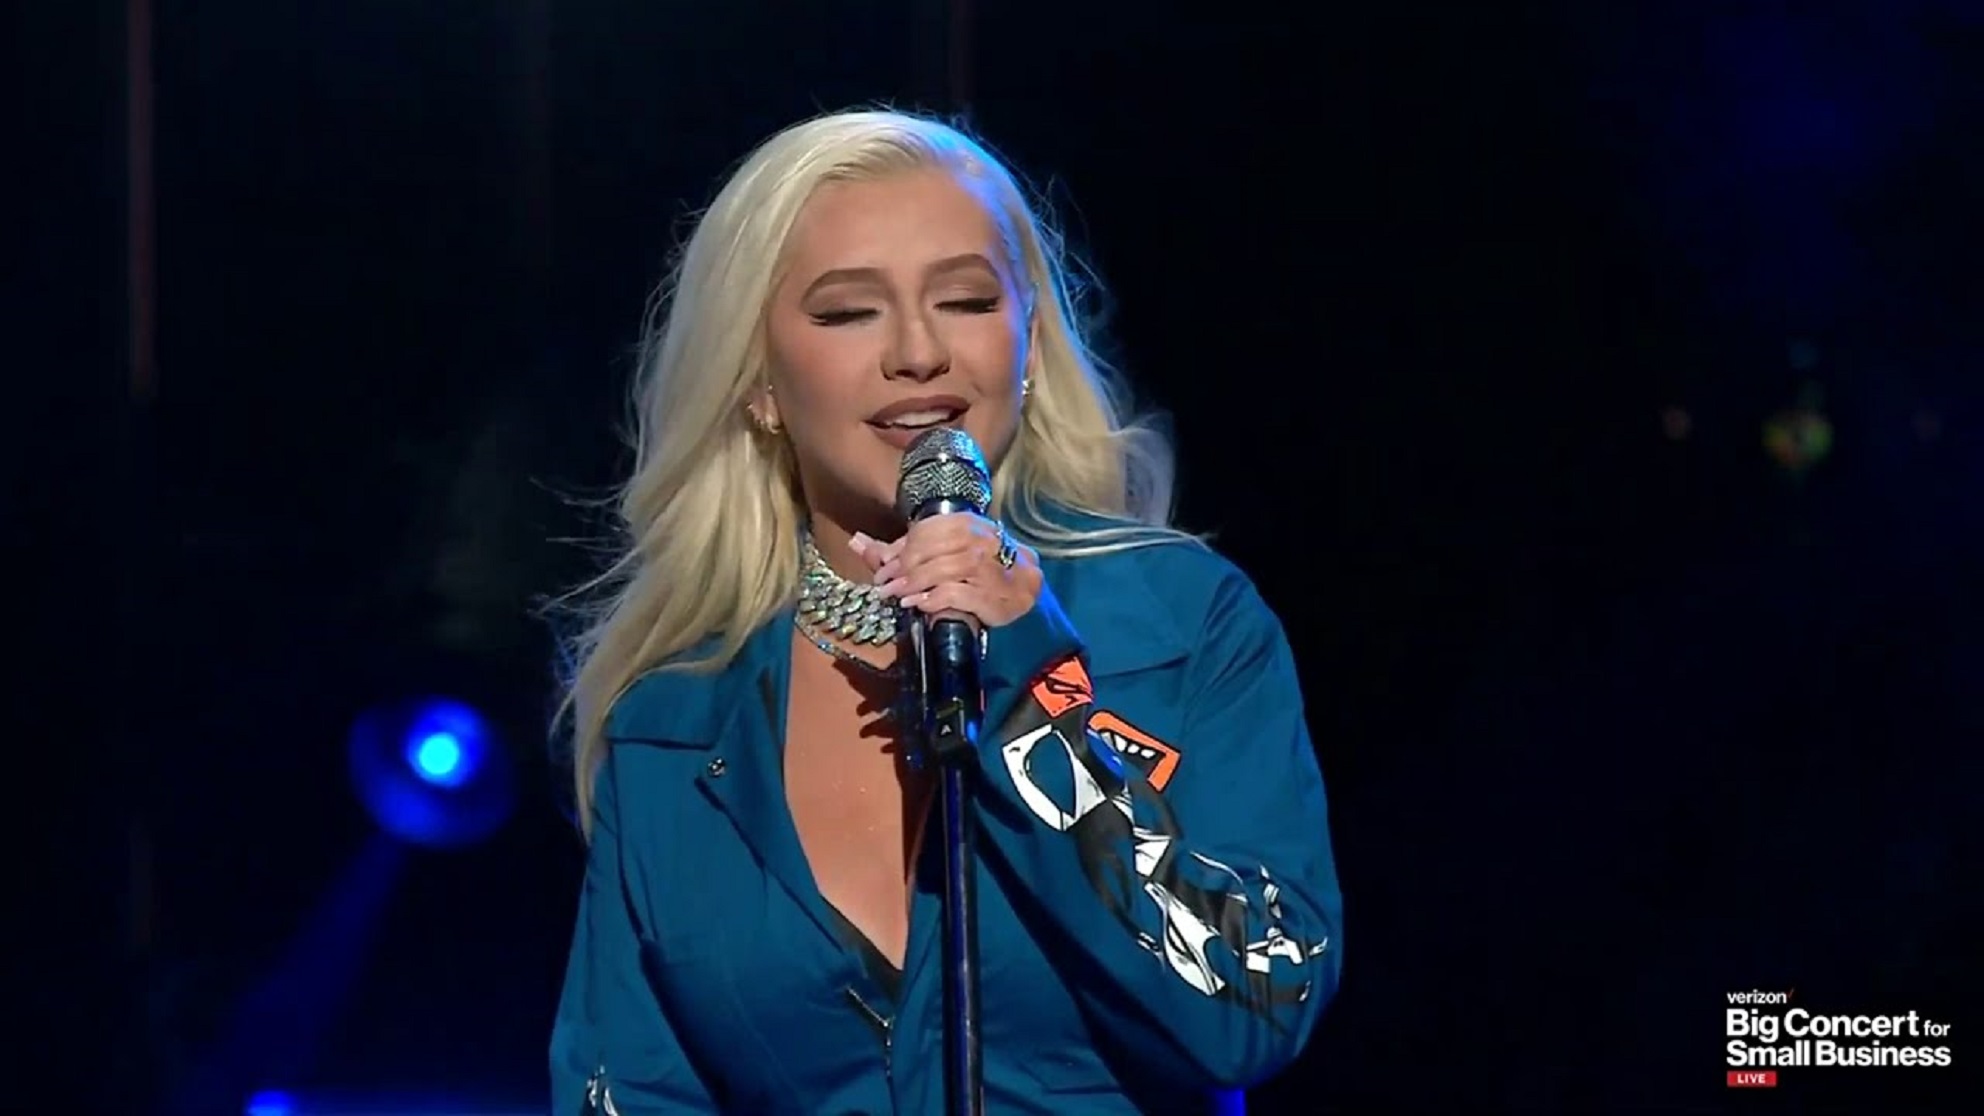 Christina Aguilera Delivers Stunning Rendition Of Her Classic ‘Beautiful’ For Verizon’s Big Concert For Small Businesses